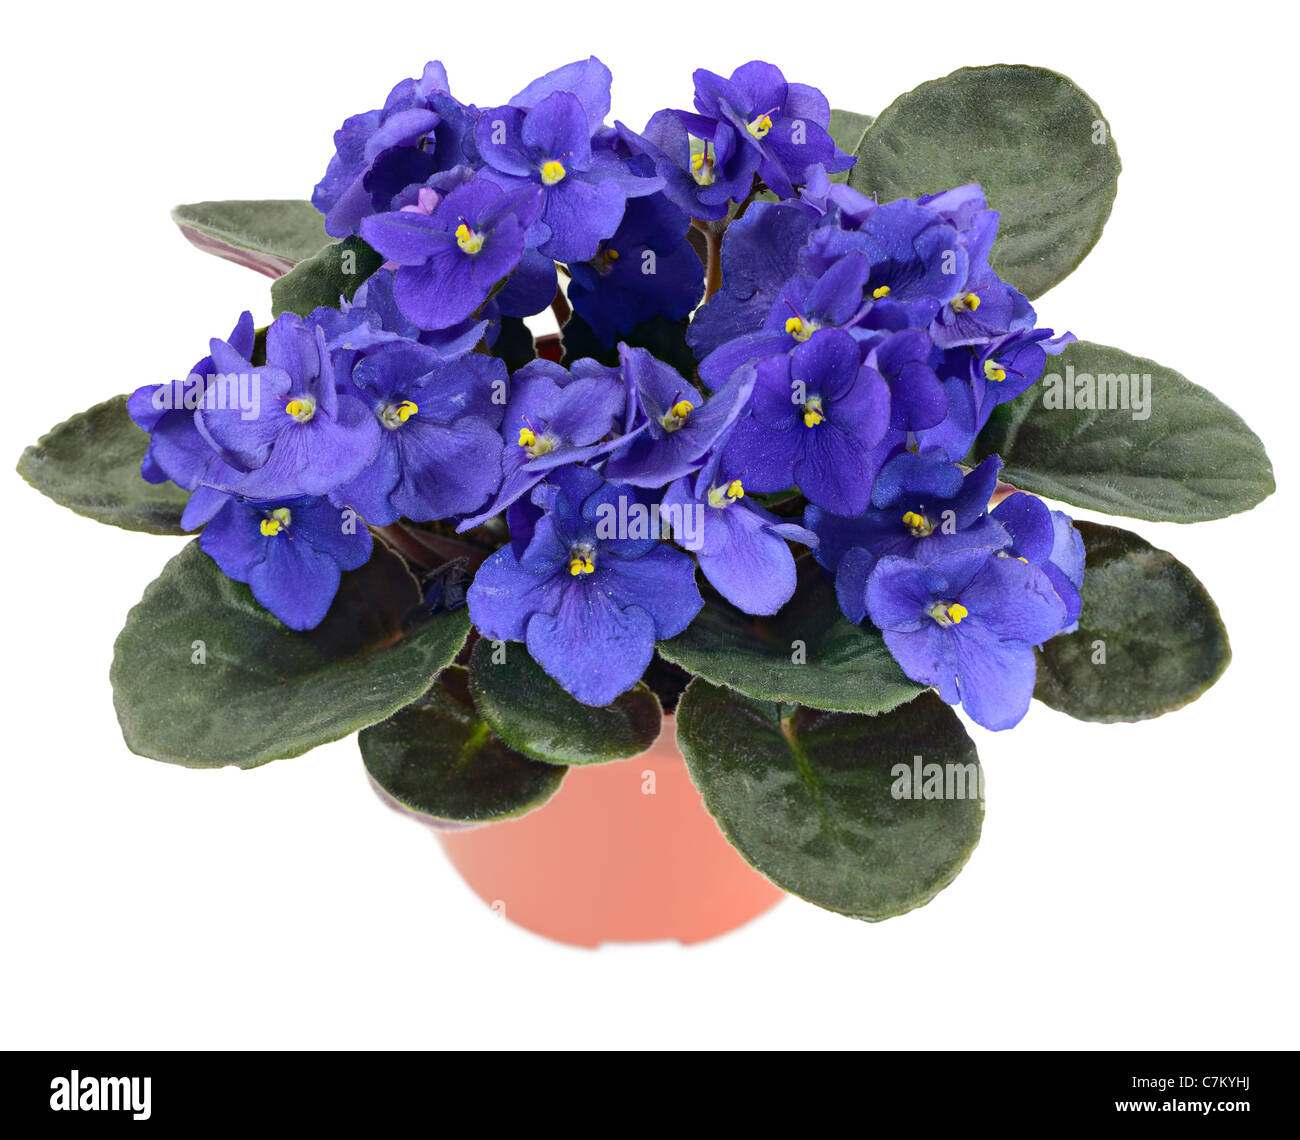 Potted African Violet (Saintpaulia ionantha) isolated on white background Stock Photo